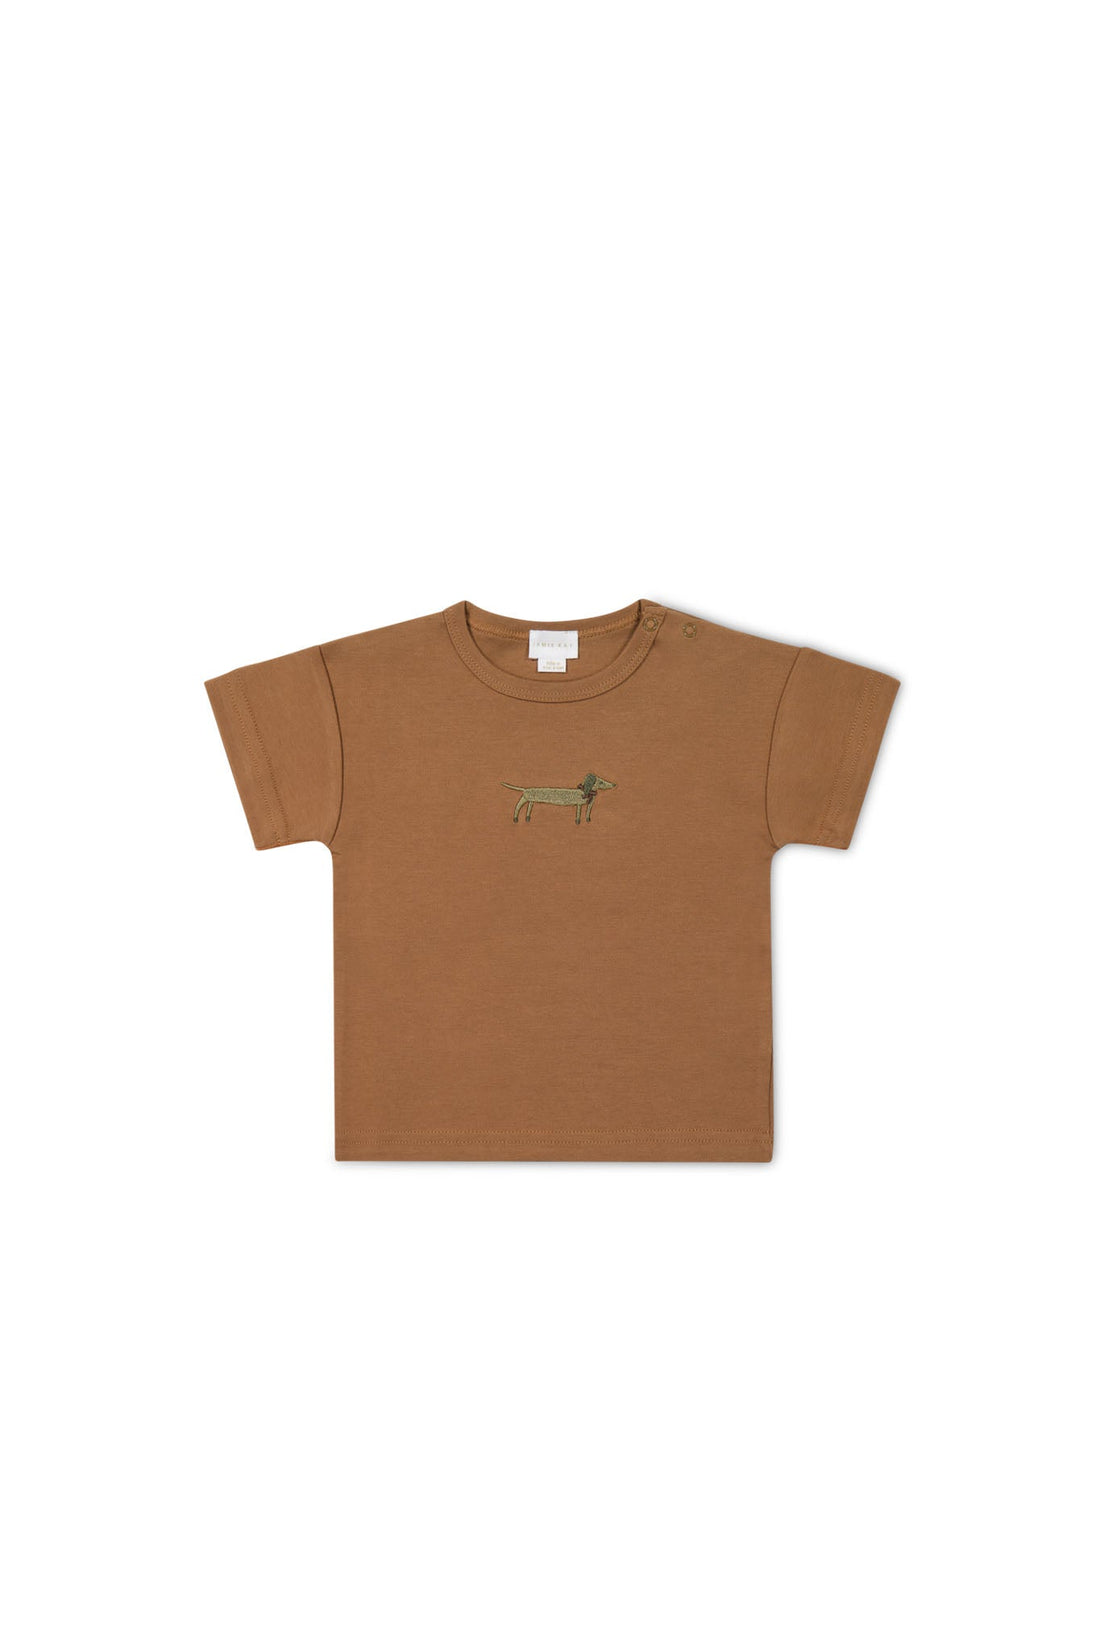 Pima Cotton Hunter Tee - Spiced Cosy Basil Childrens Top from Jamie Kay USA